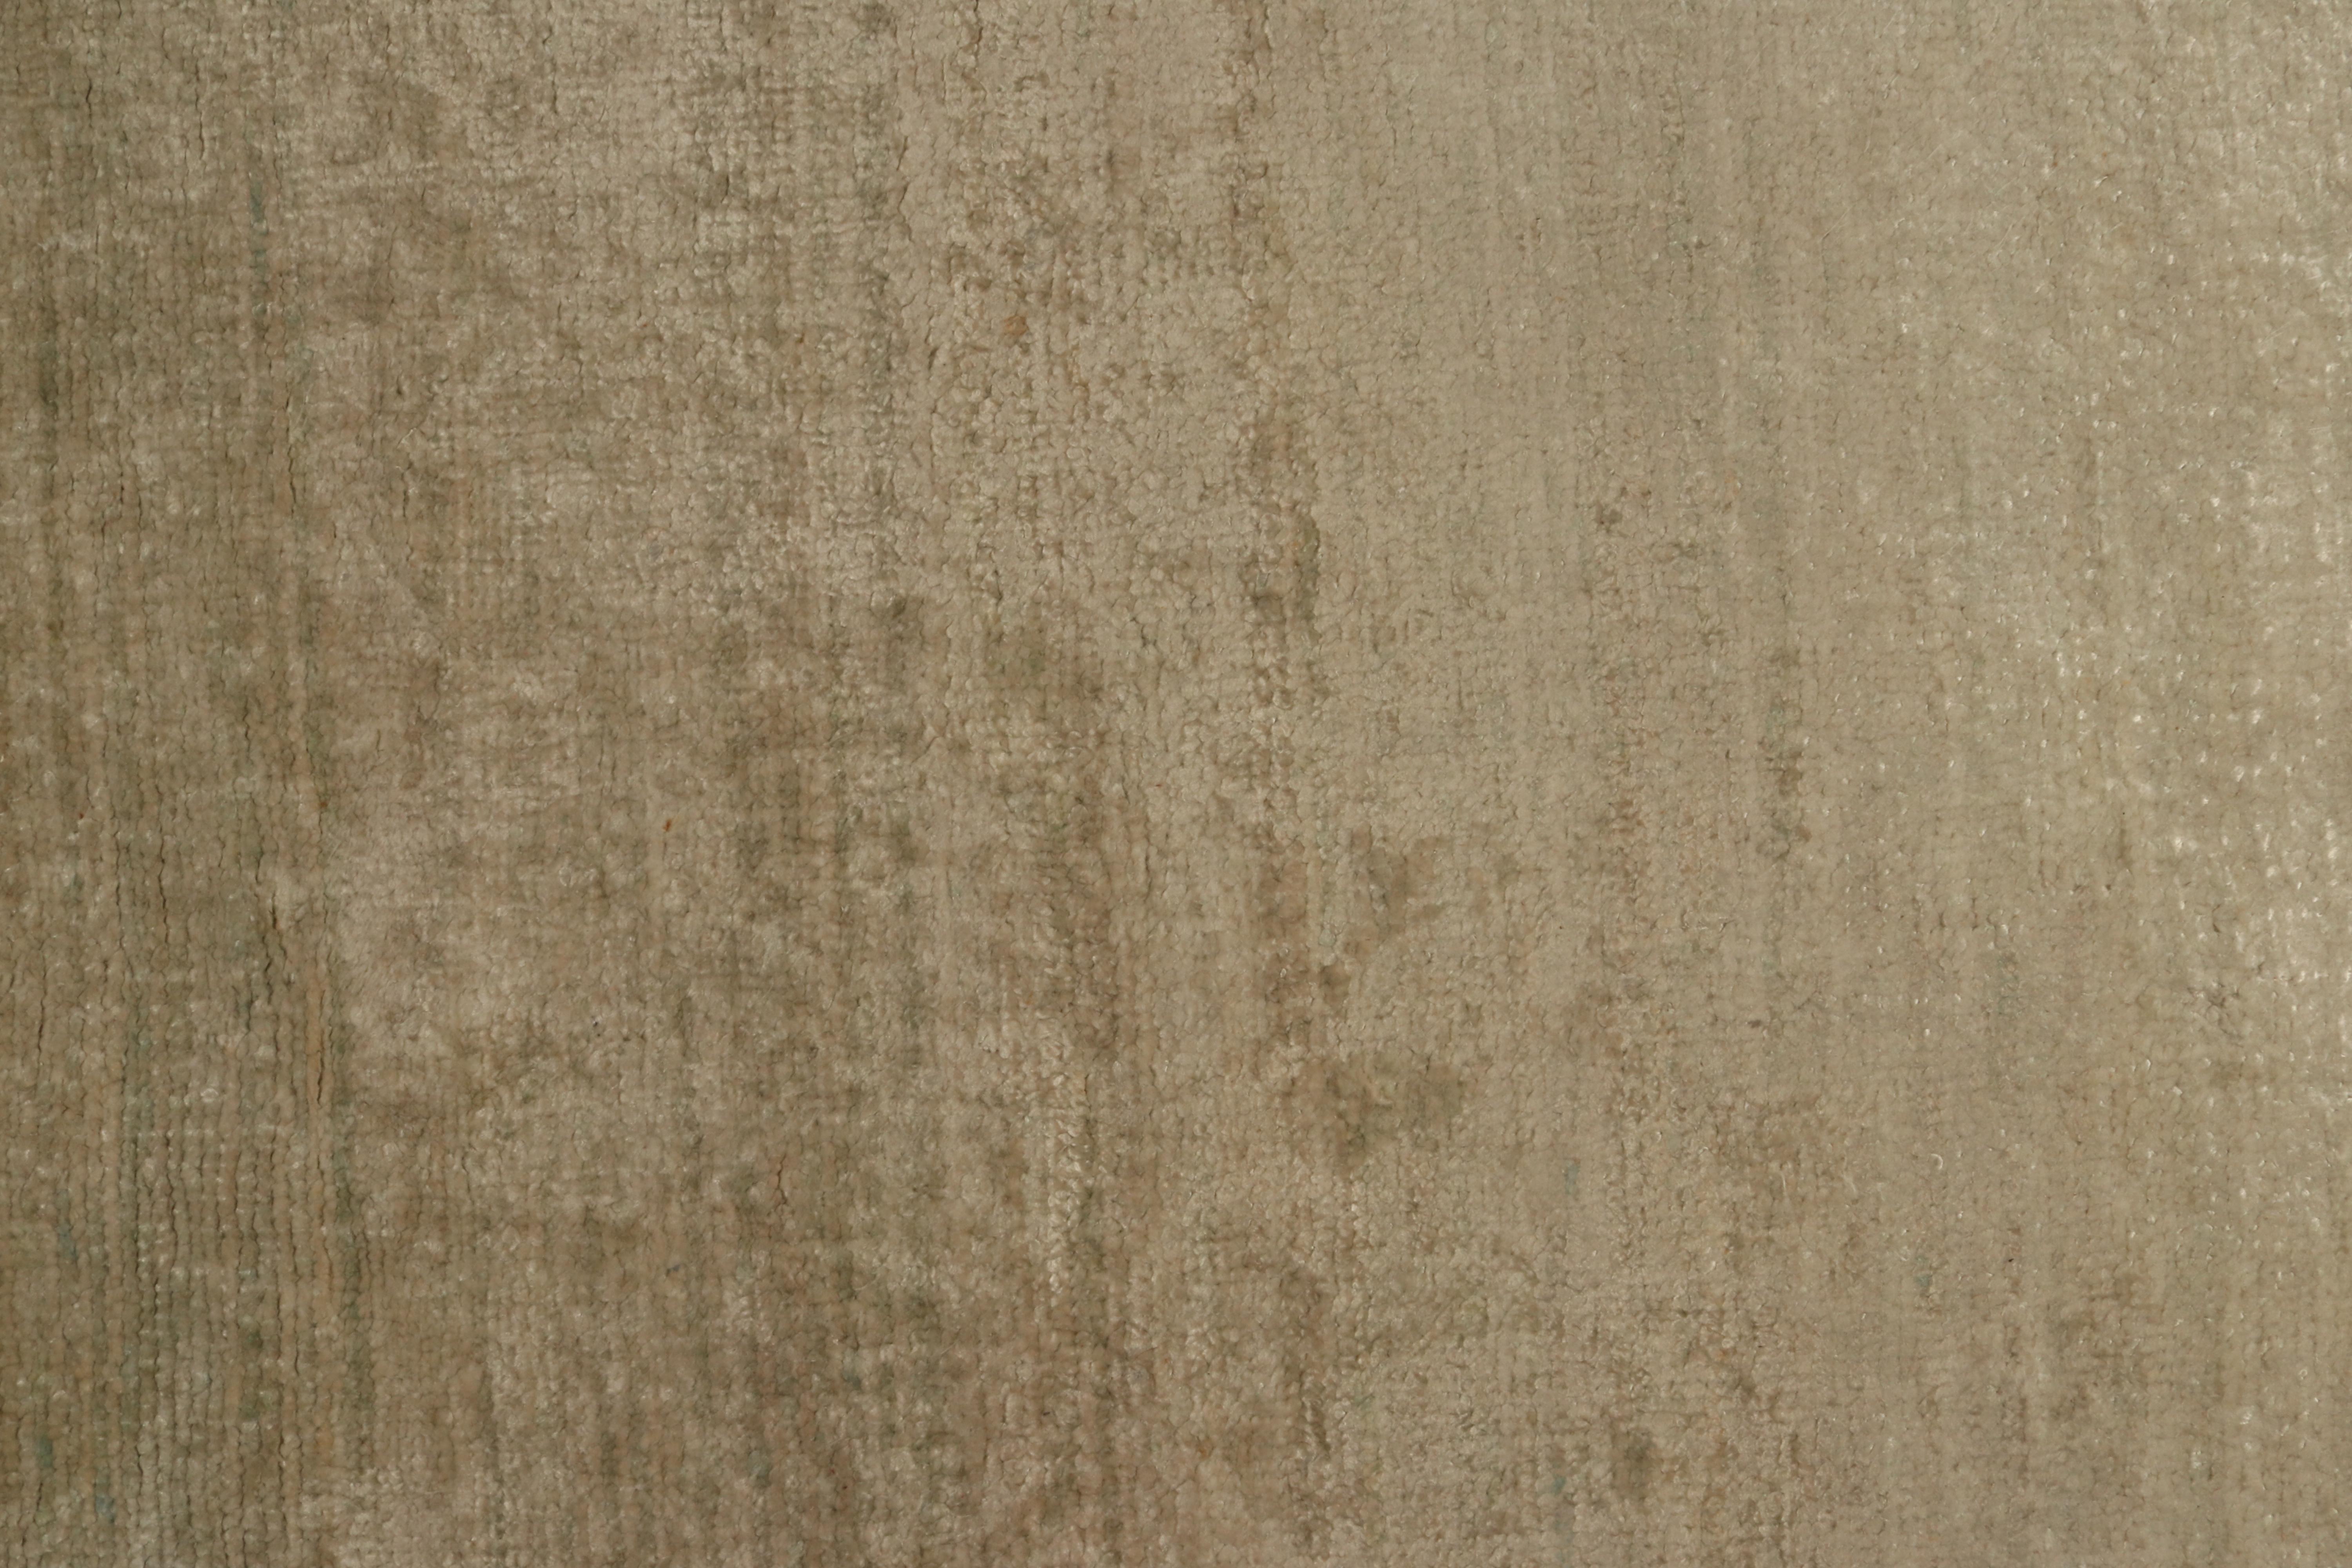 Rug & Kilim’s Solid Beige Rug in Tone-on-tone Hand-Knotted Silk Striae In New Condition For Sale In Long Island City, NY